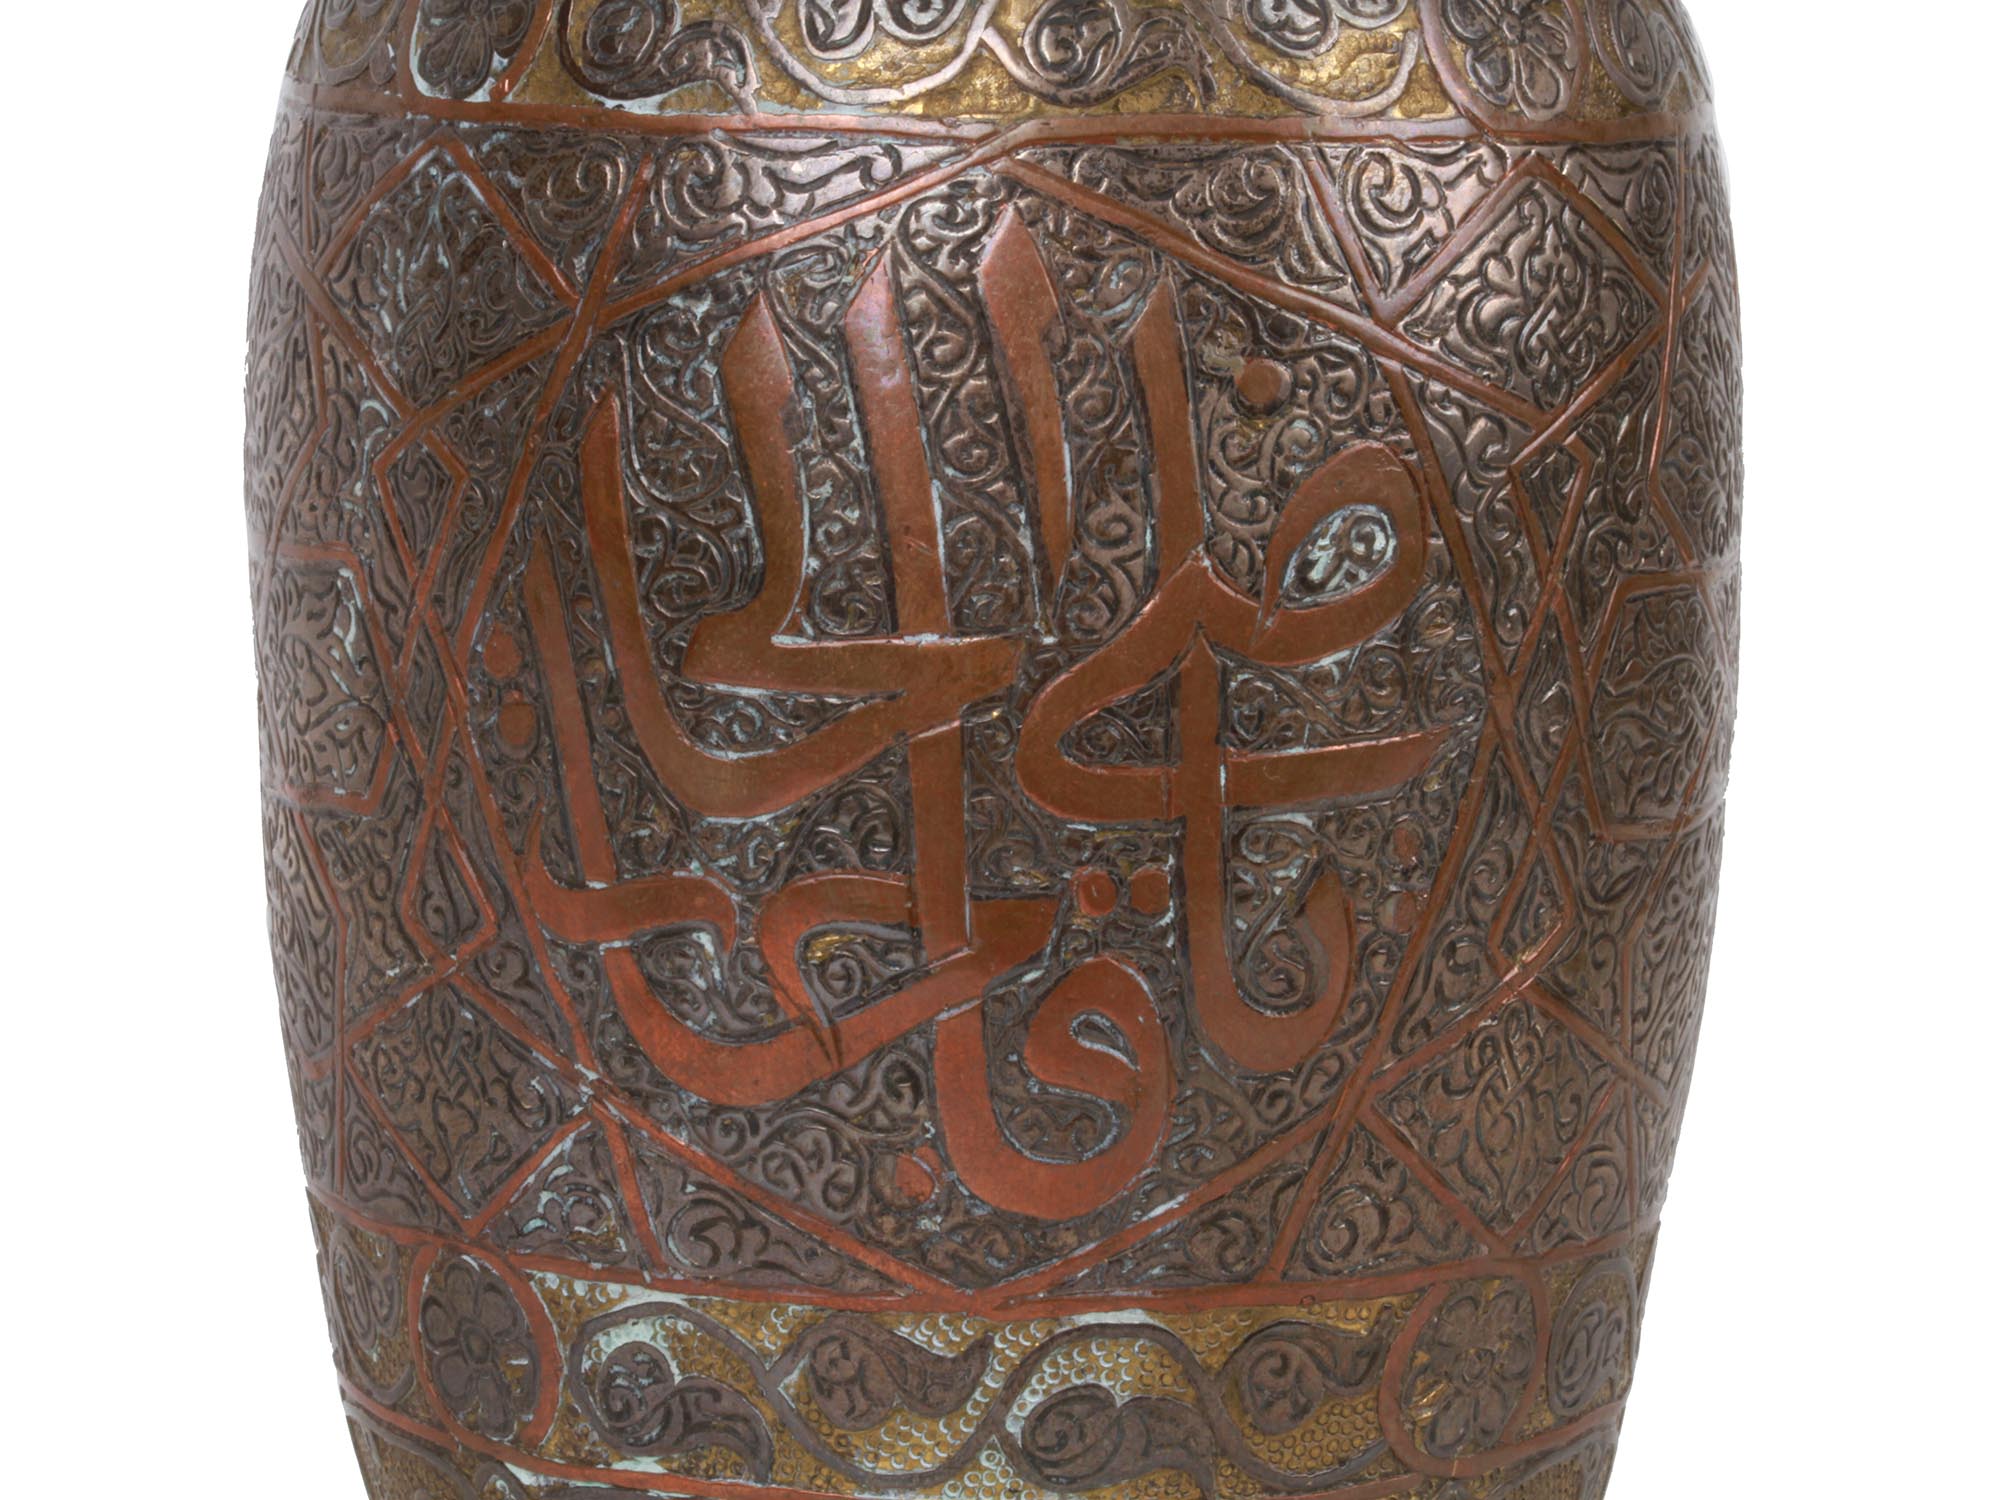 PAIR OF ARABIC SYRIAN COOPER SILVER INLAID VASES PIC-7